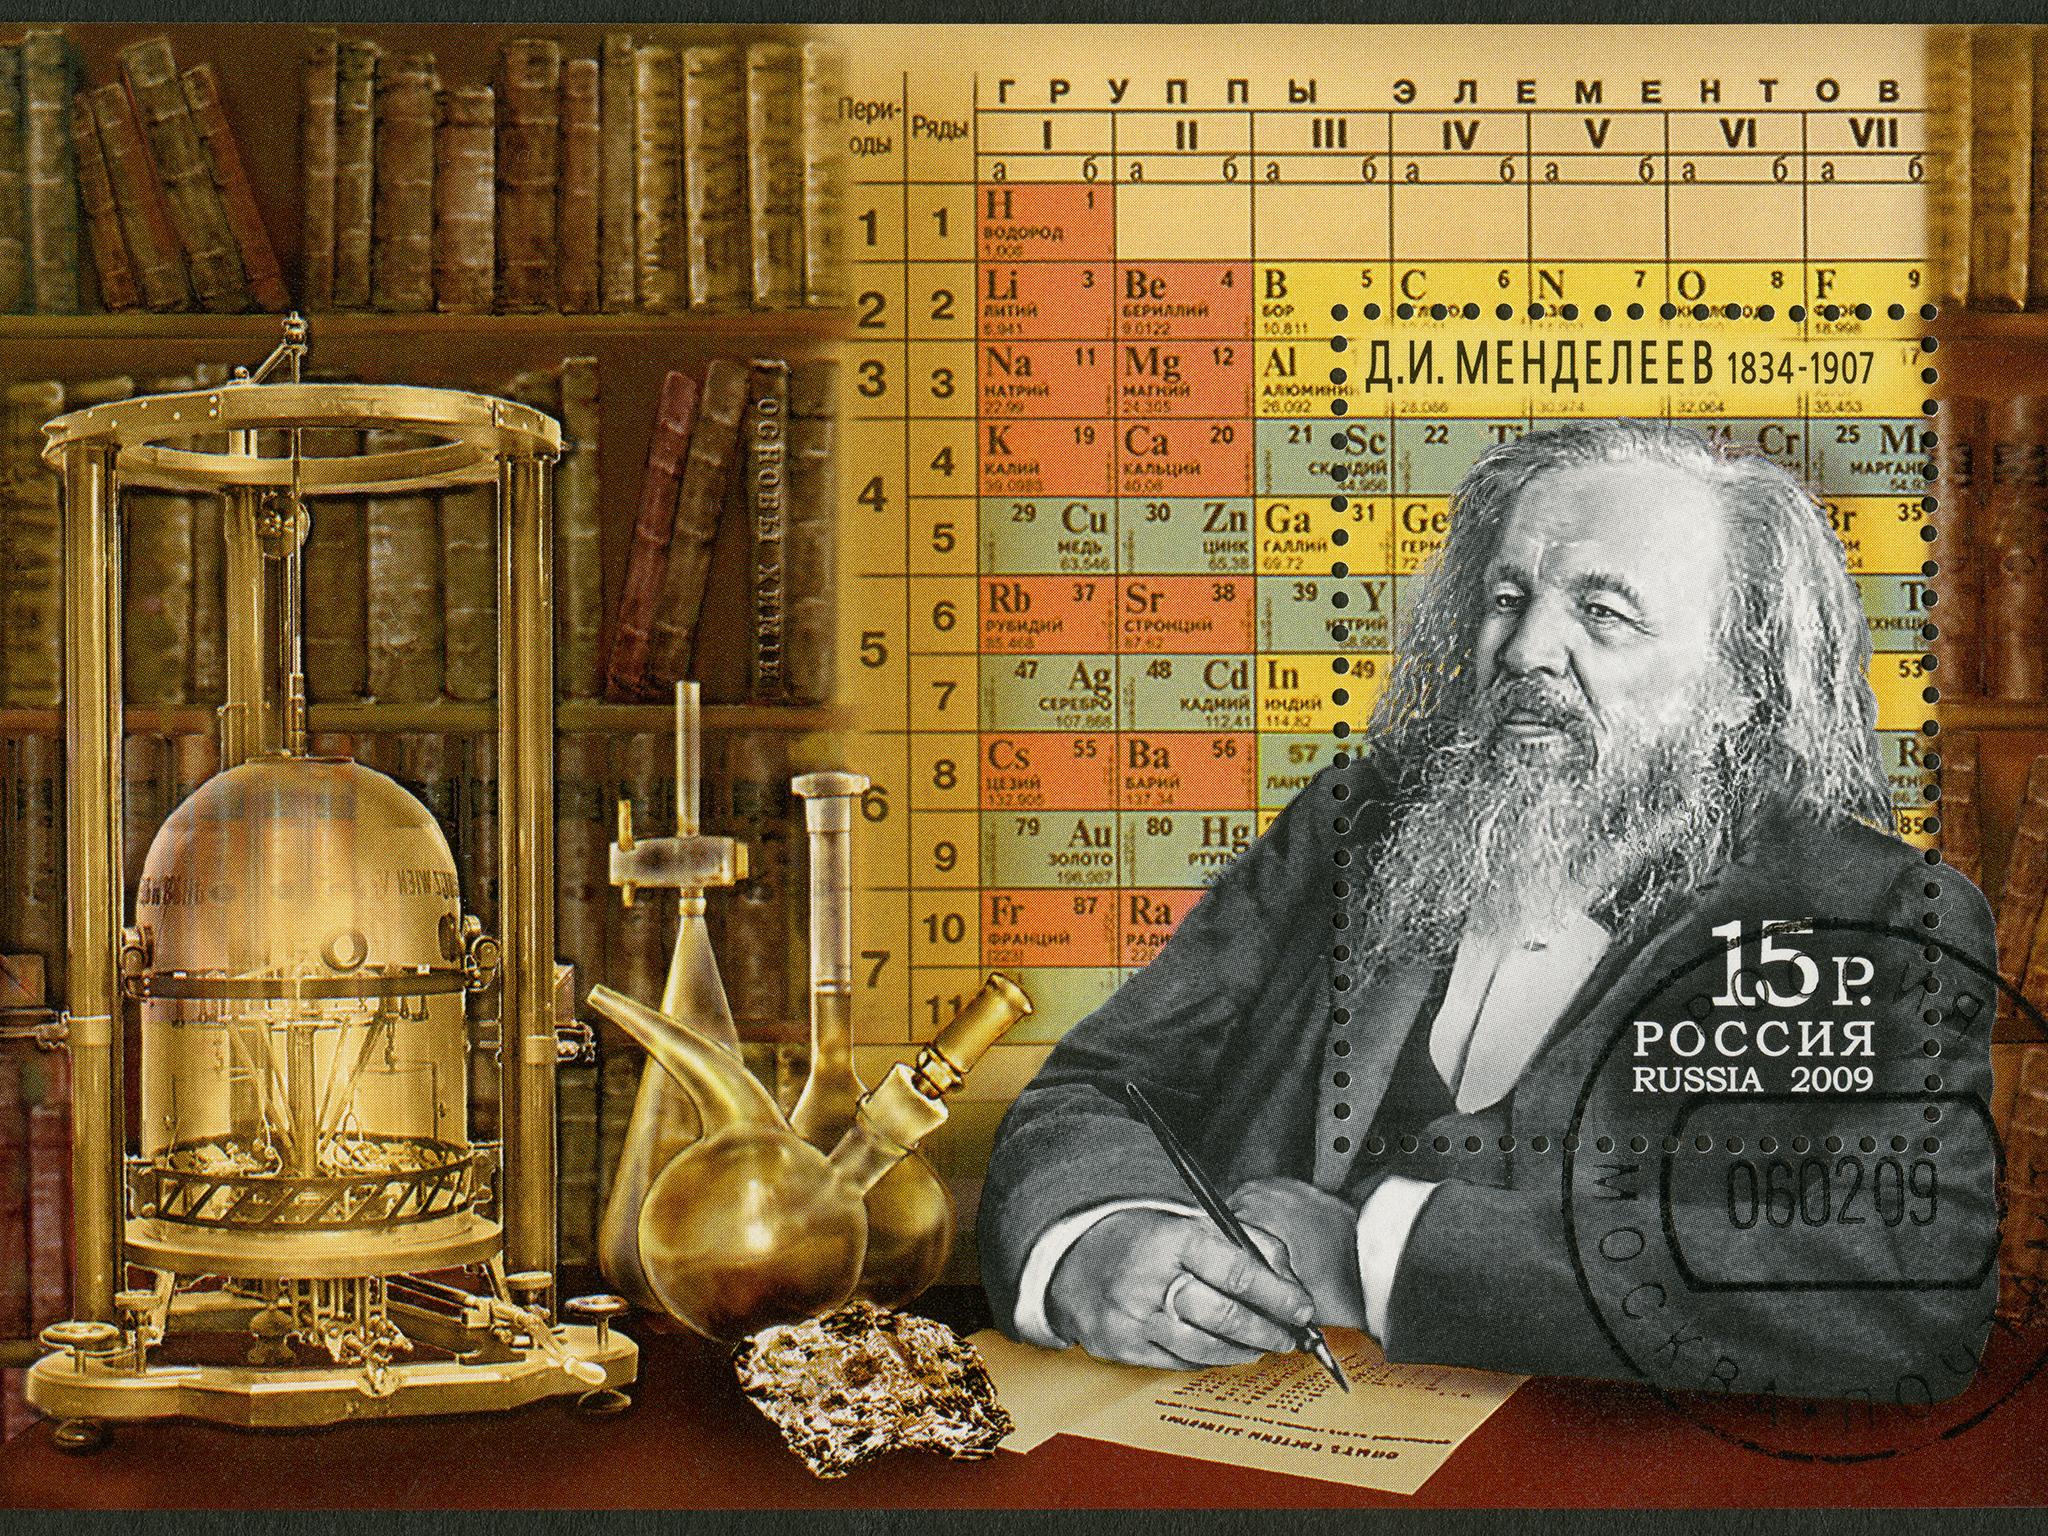 A 2009 Russian stamp celebrates Dmitri Mendeleev, the creator of the first periodic table